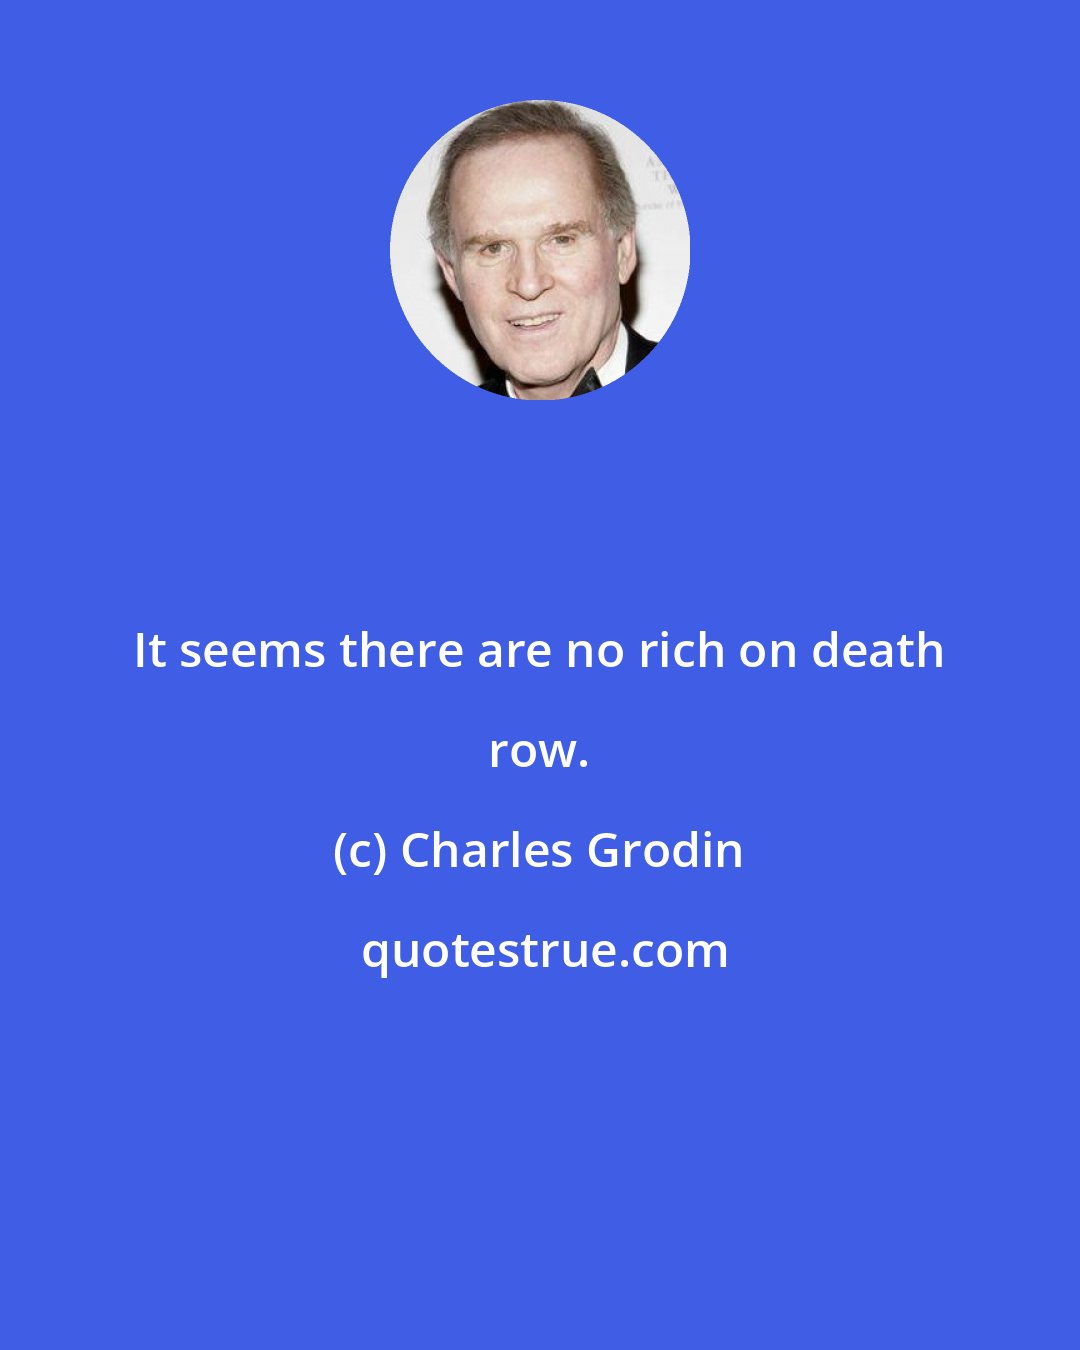 Charles Grodin: It seems there are no rich on death row.